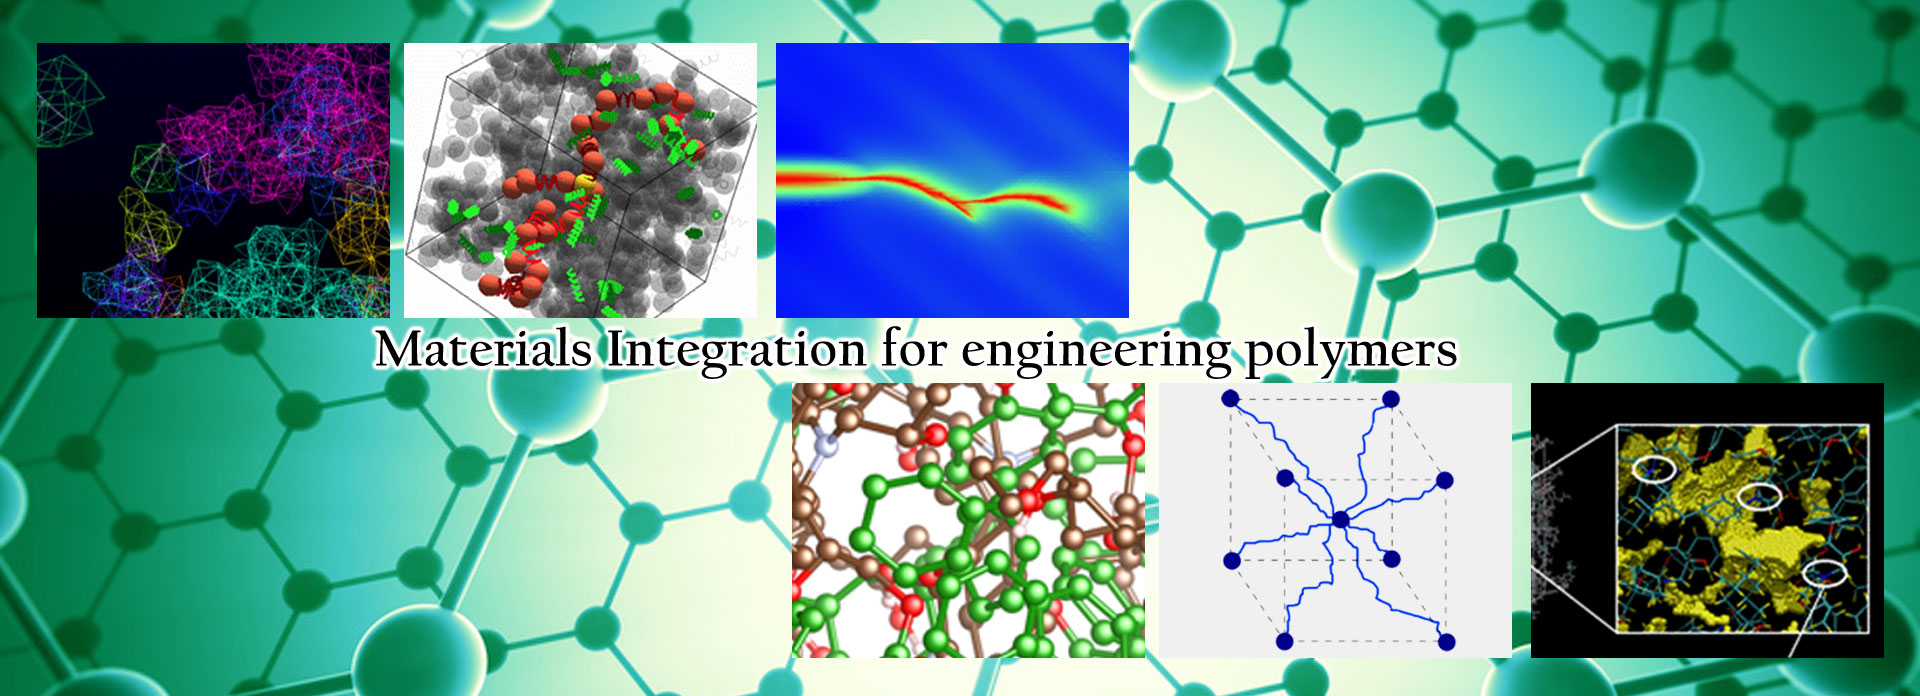 Materials Integration for engineering polymers